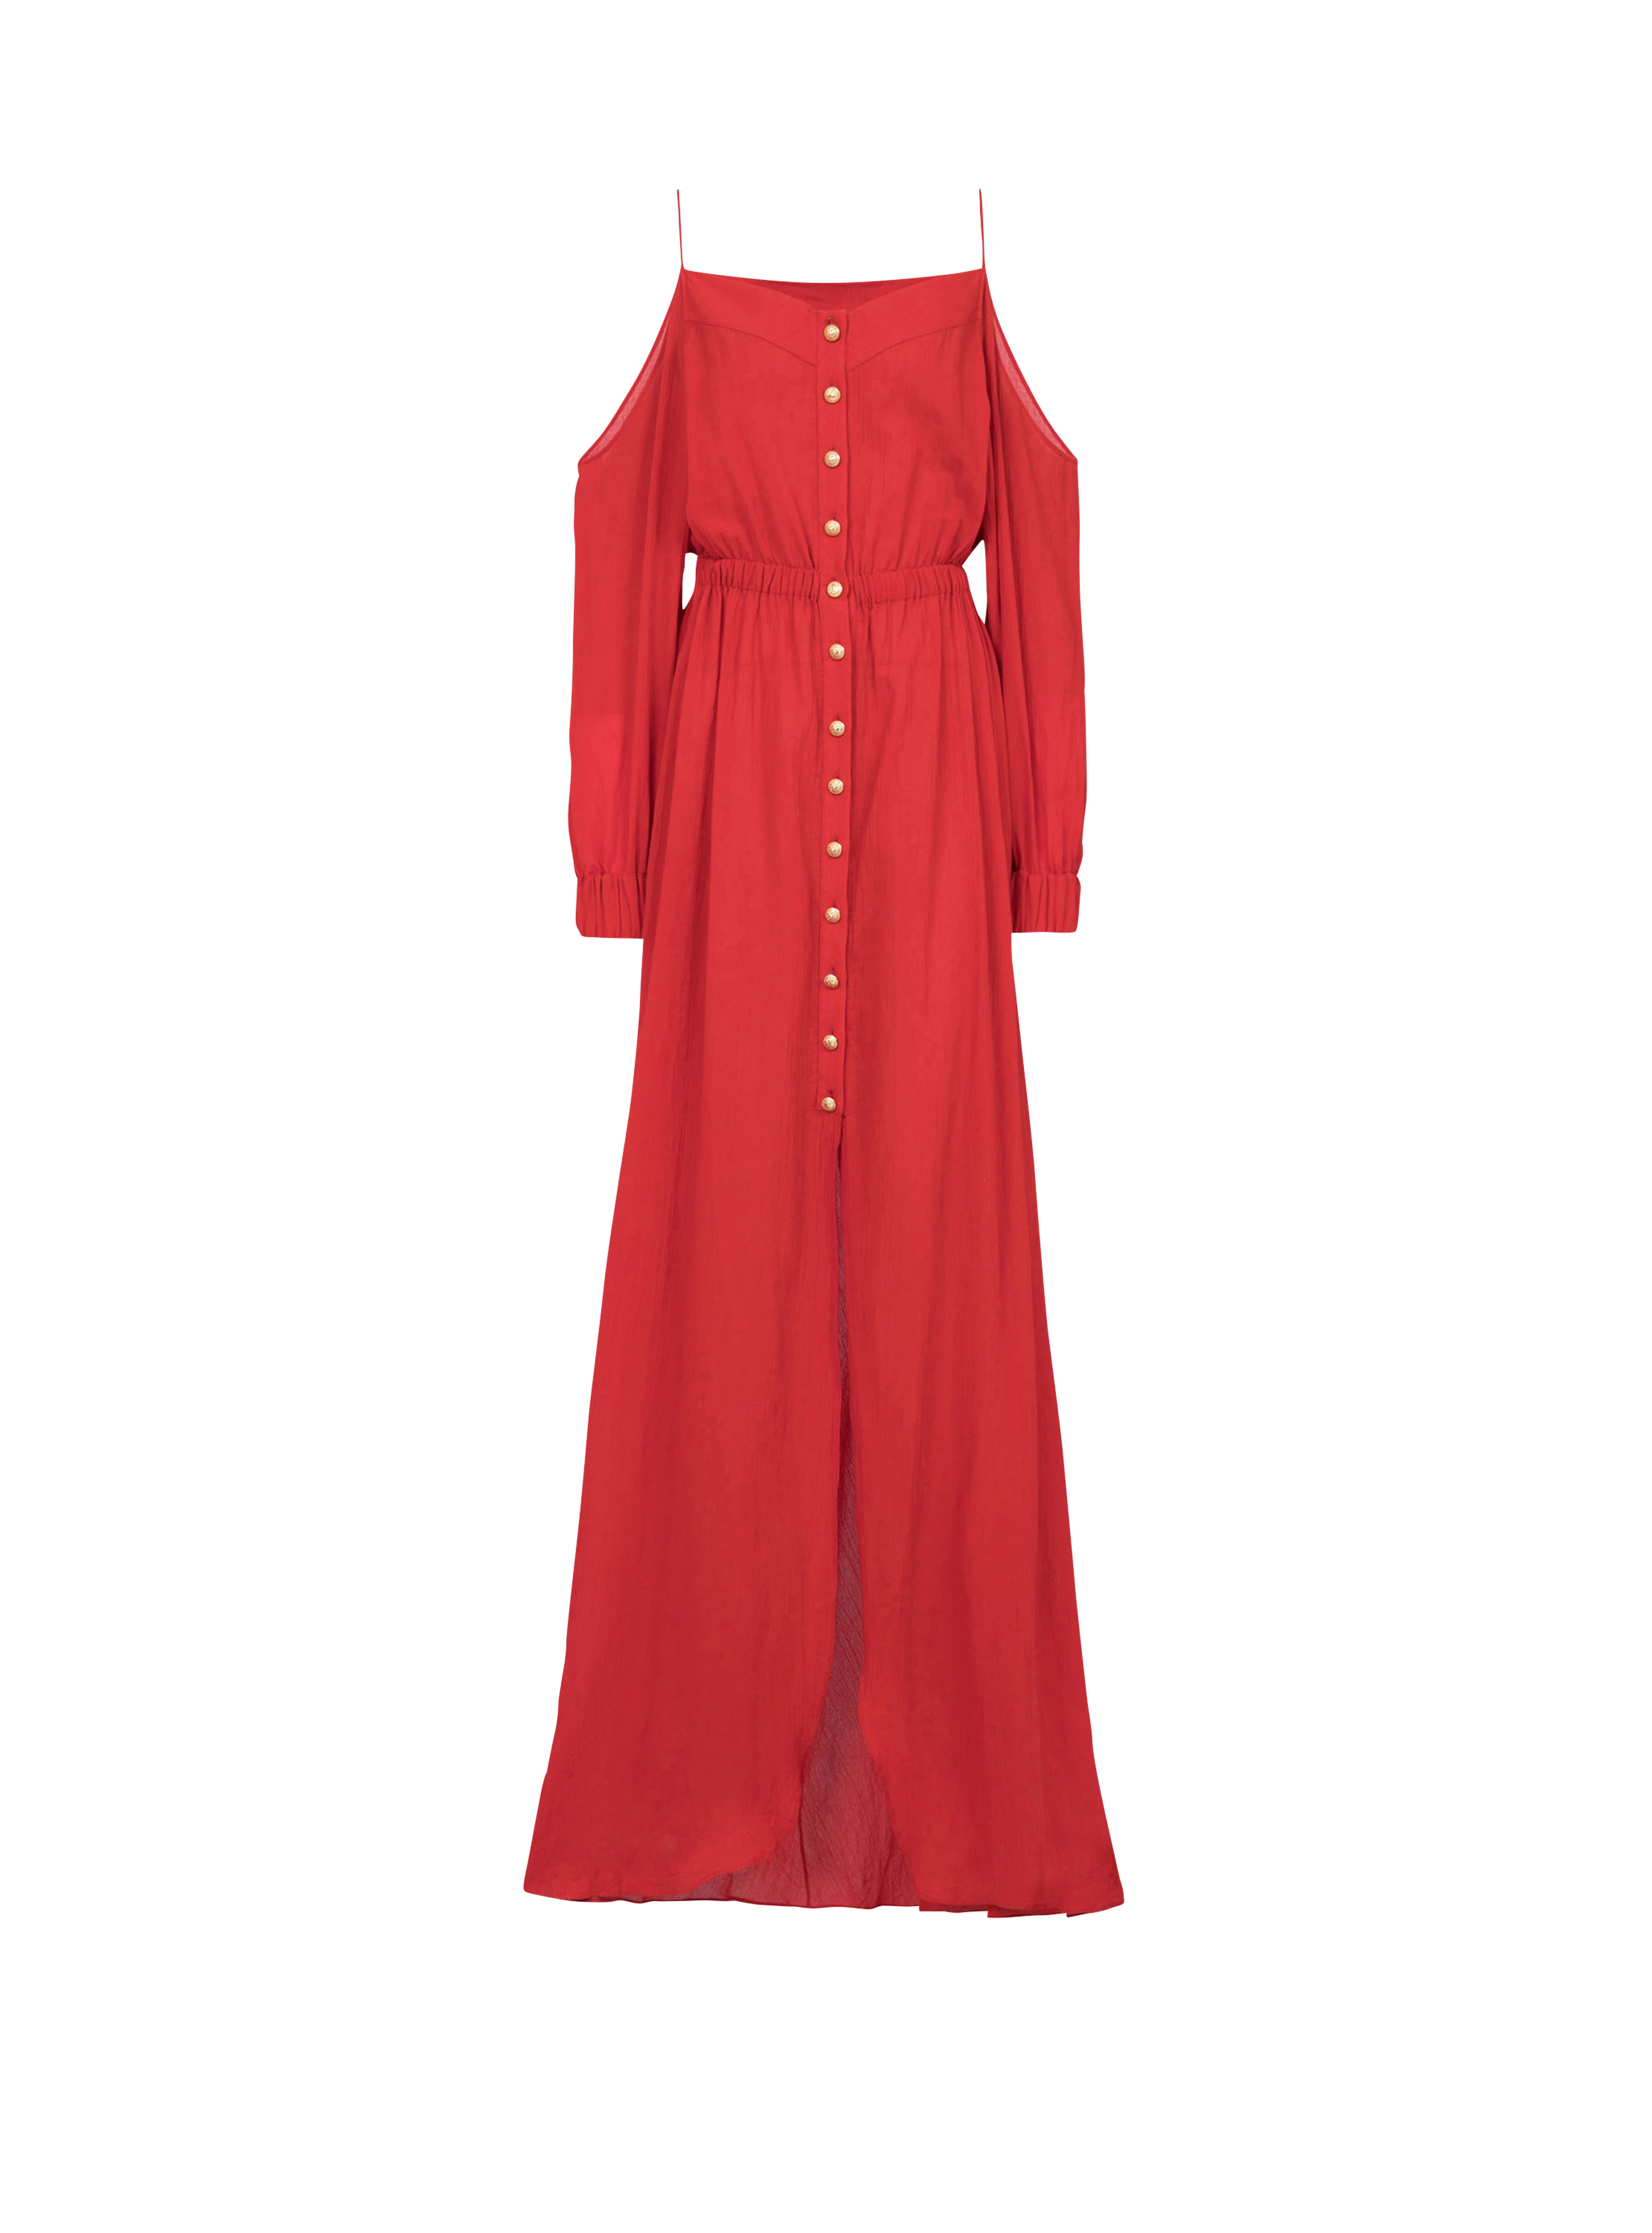 HIGH SUMMER CAPSULE - Long cotton dress, red, hi-res